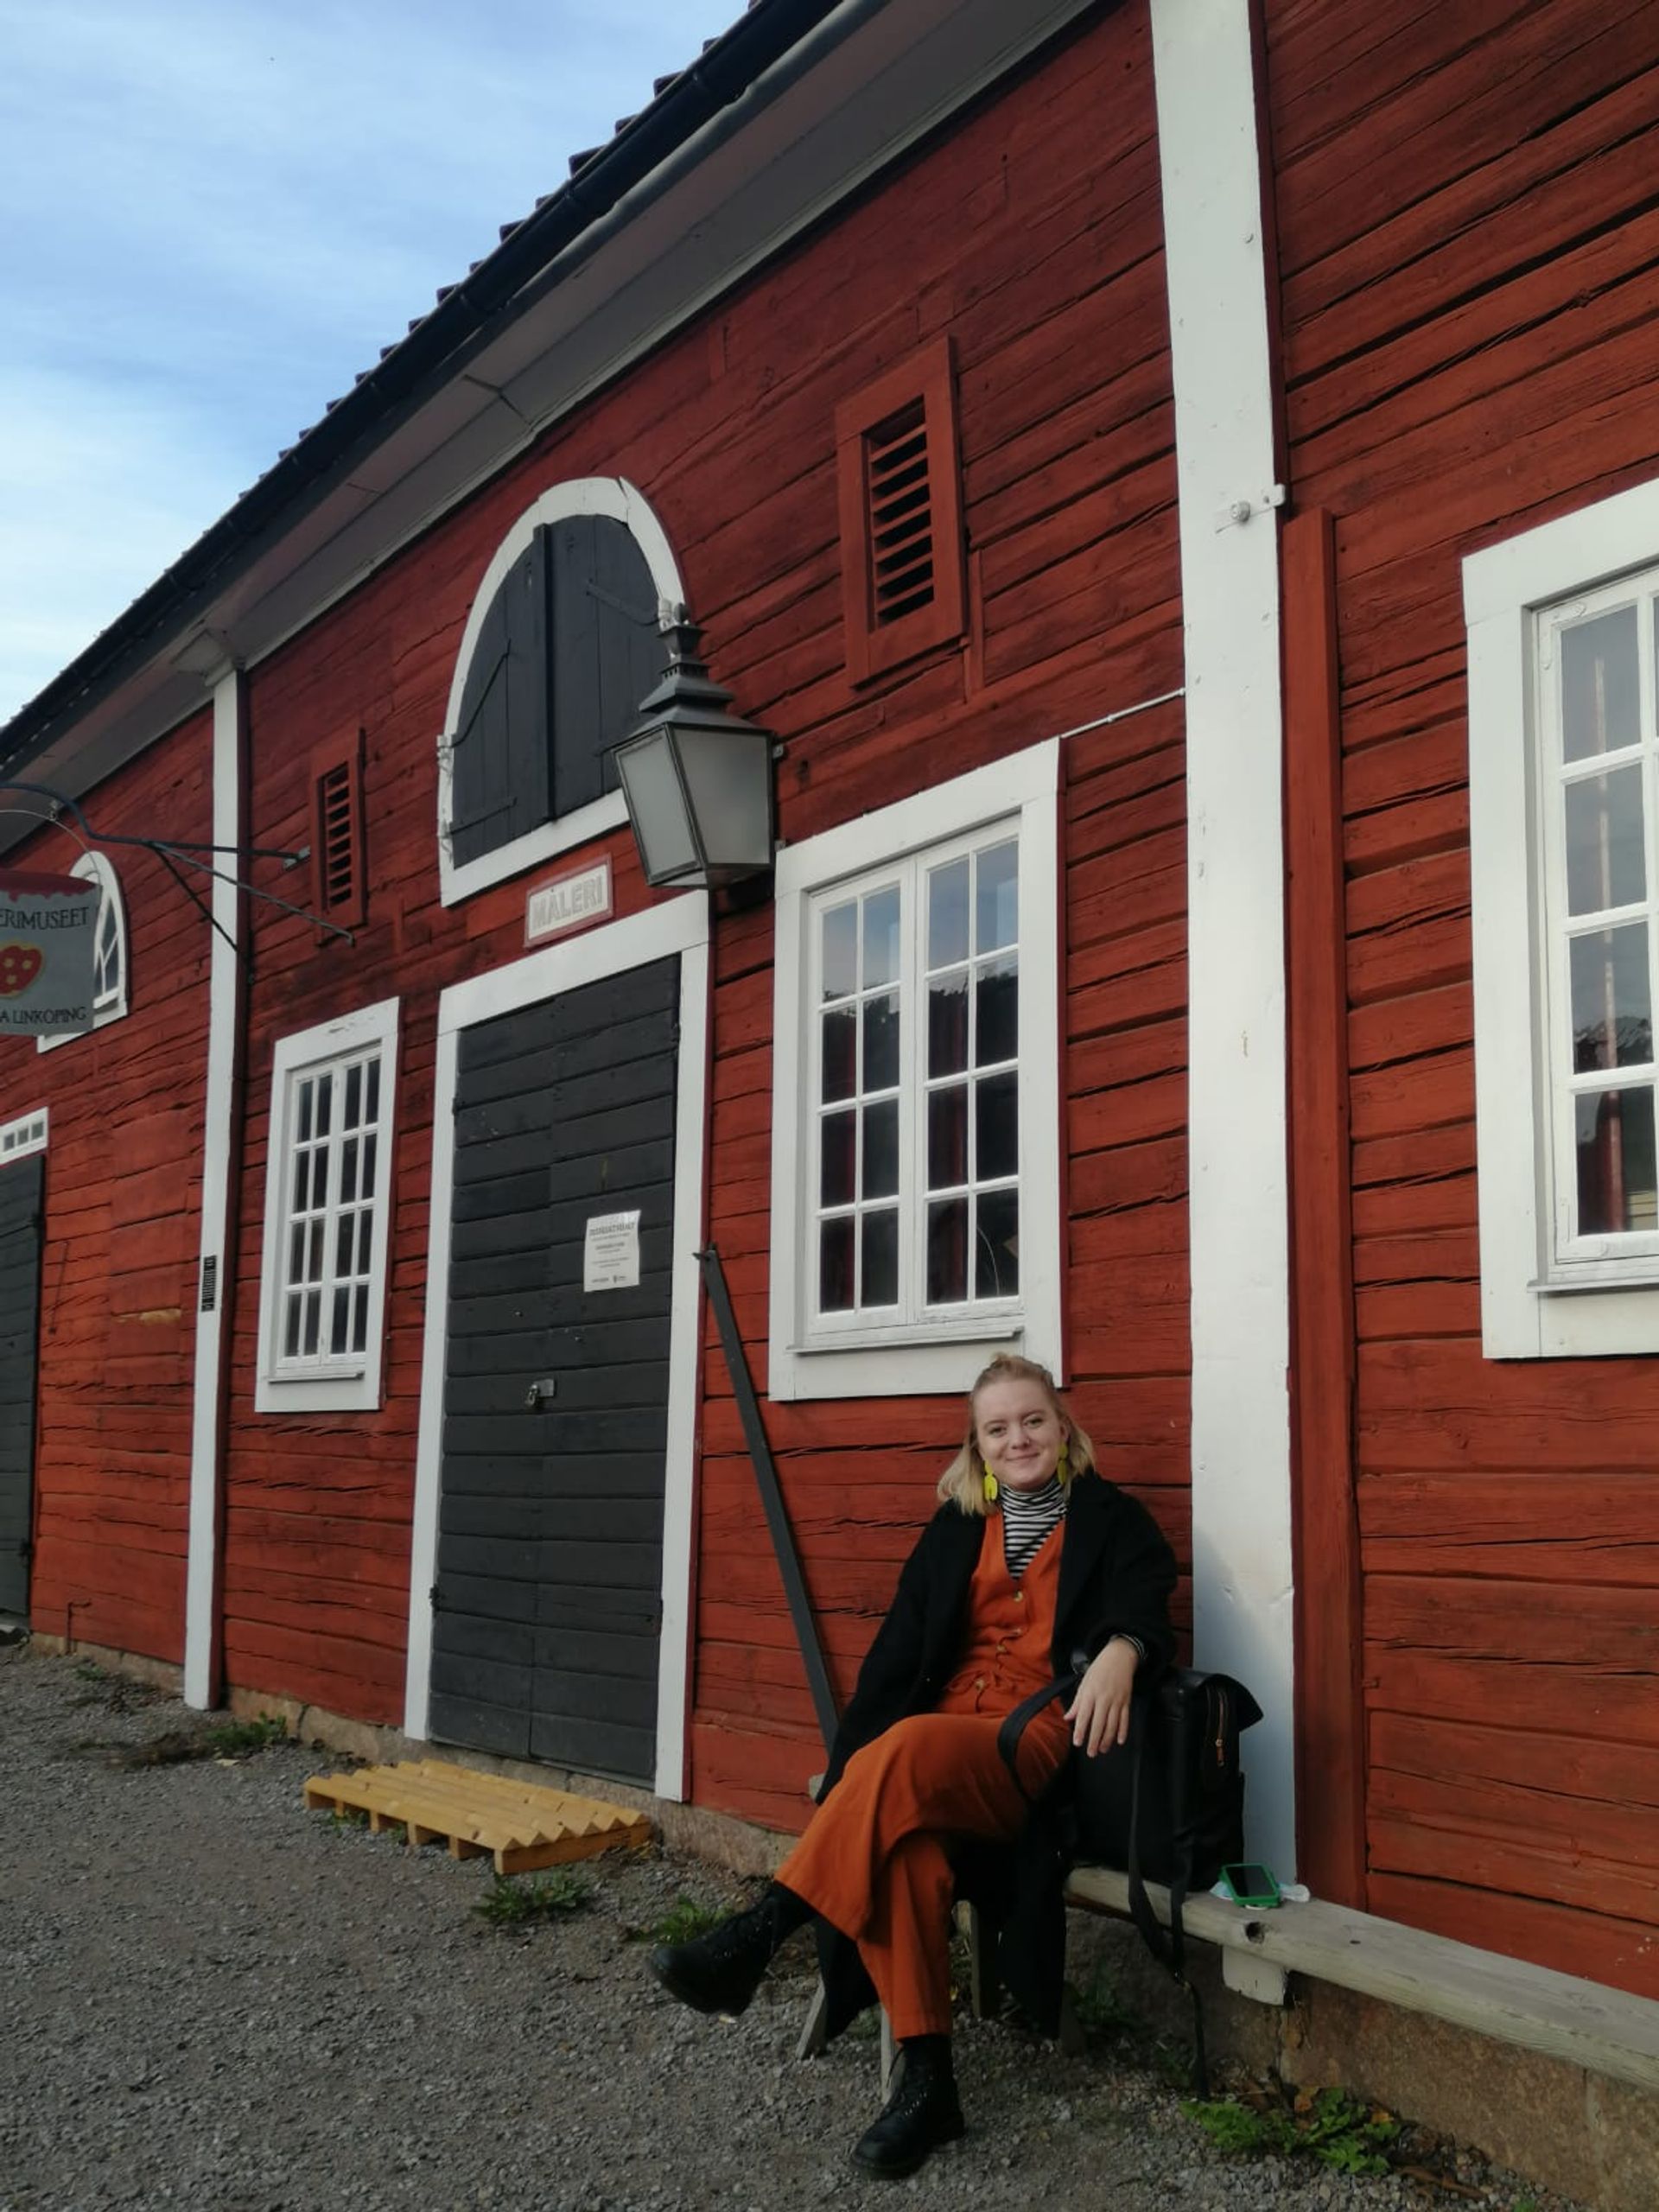 Brooke sitting in front of a red building